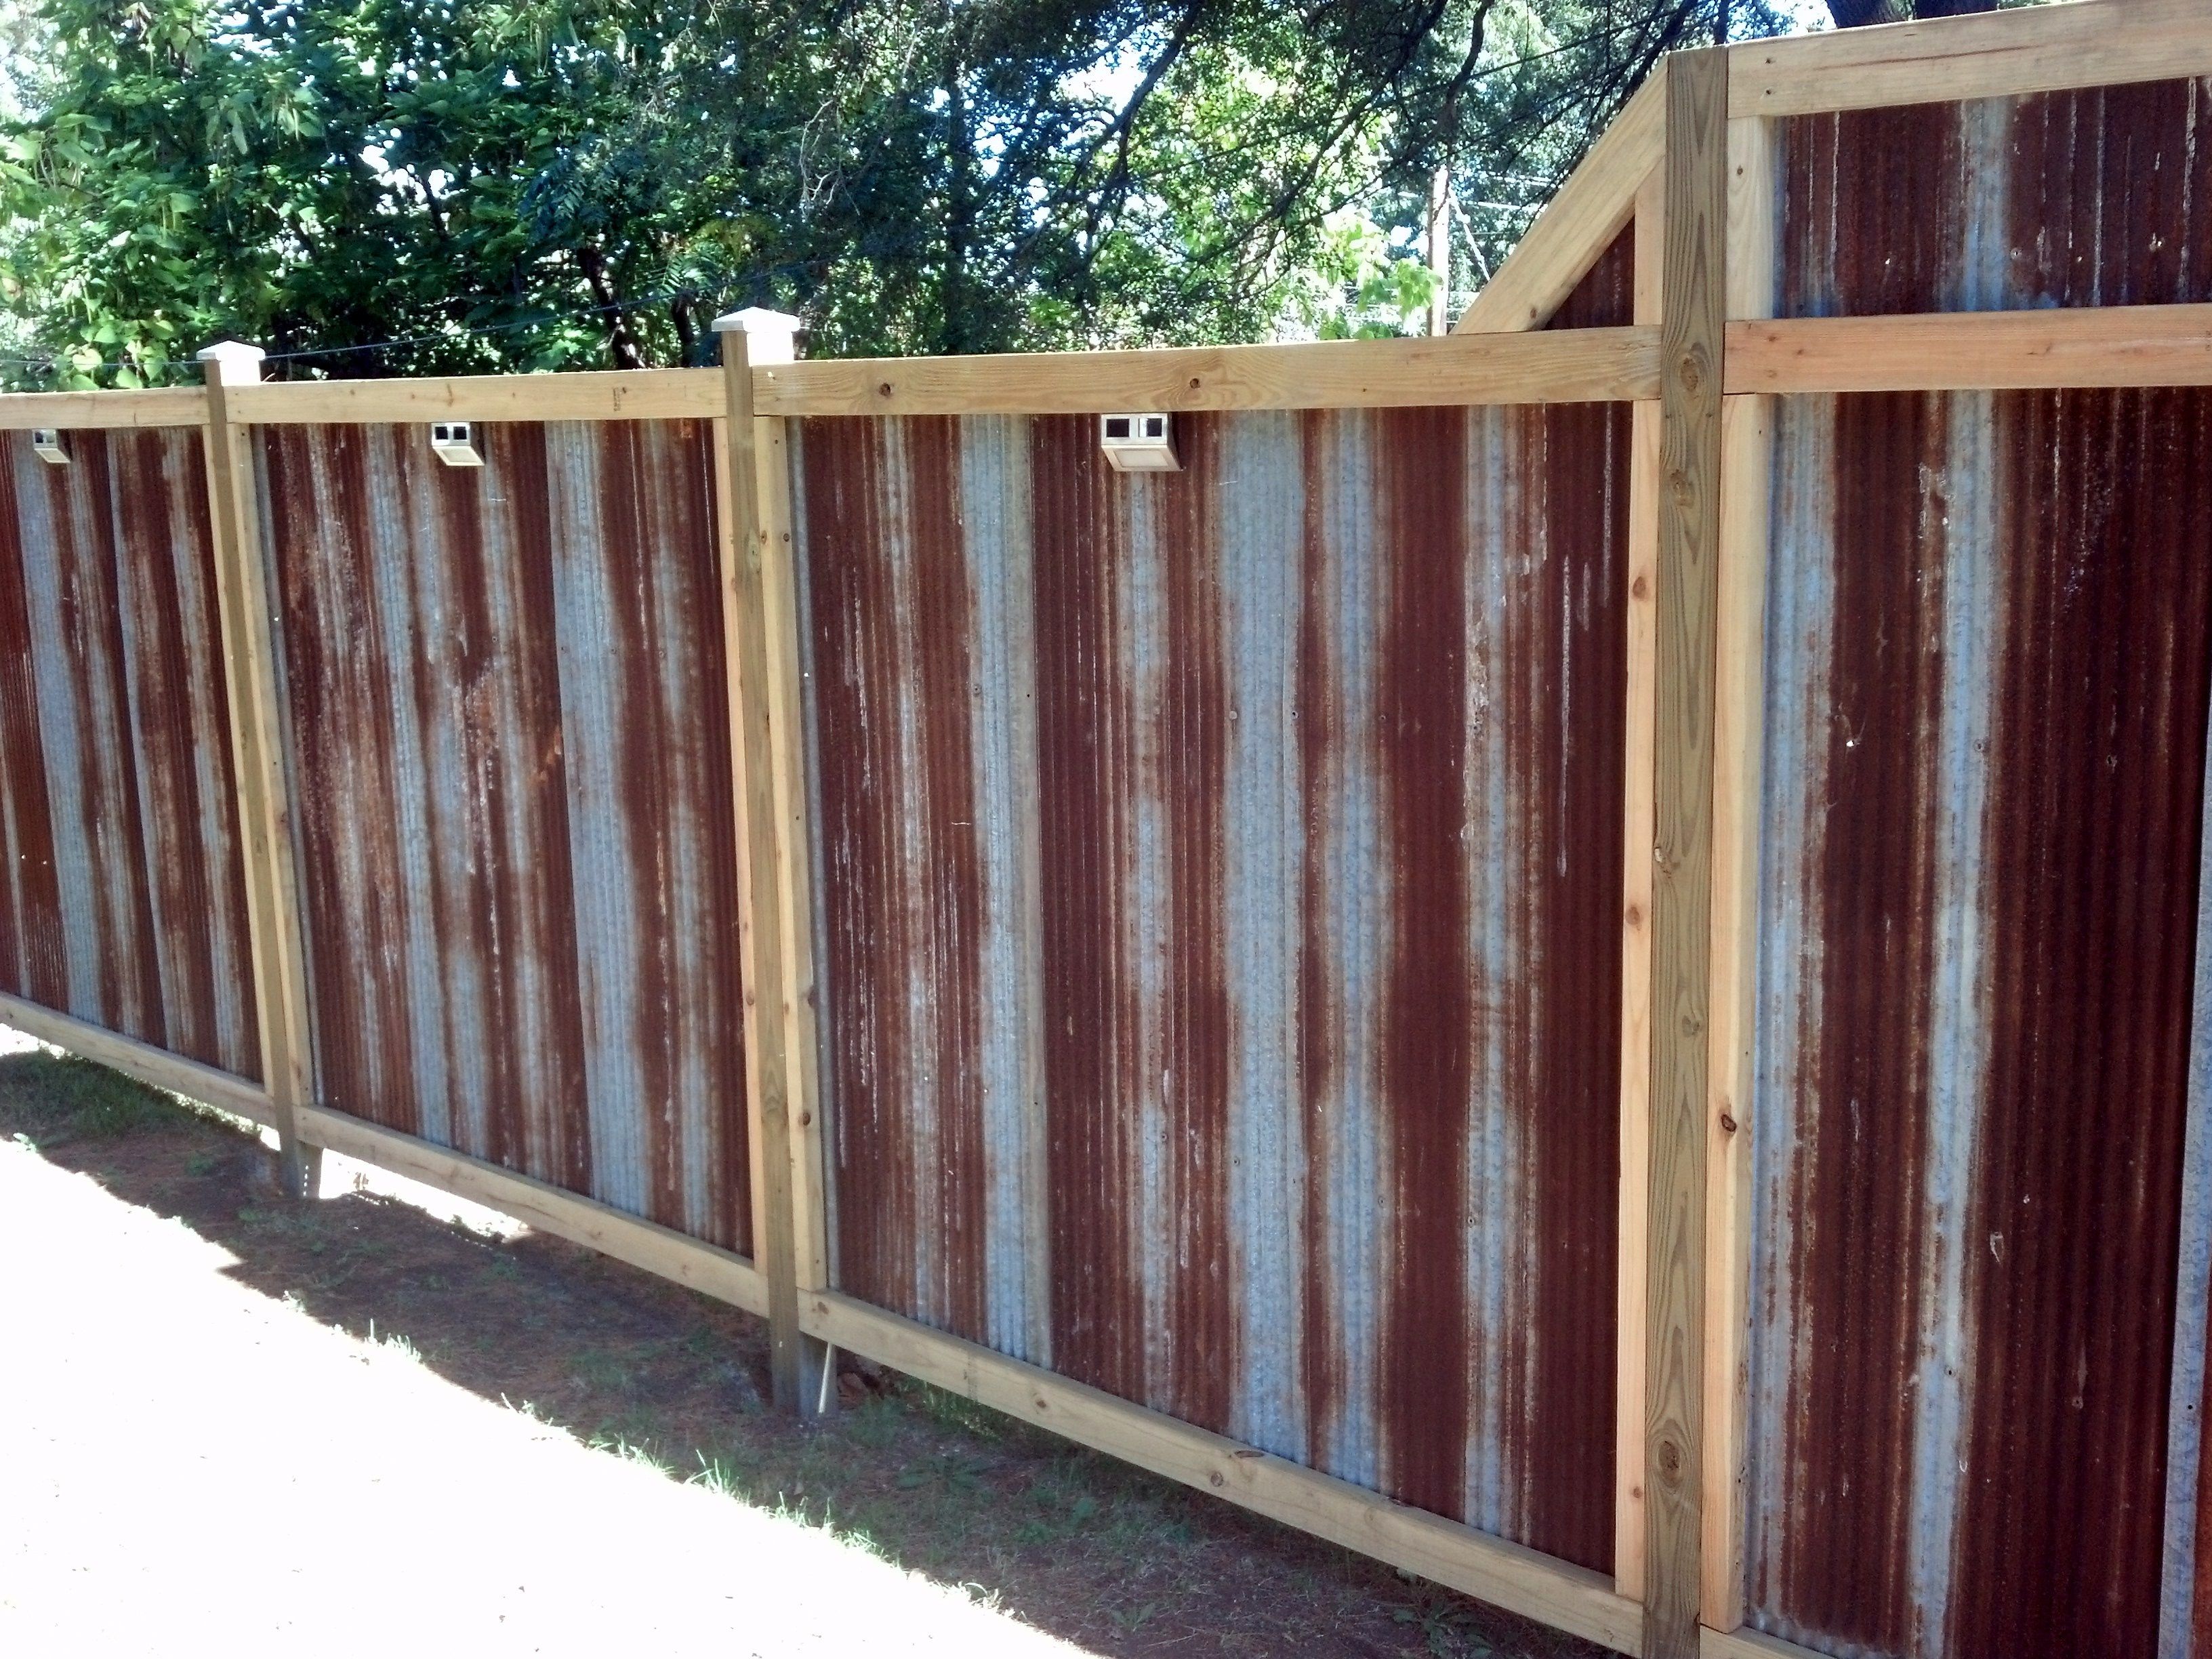 The rustic corrugated tin fence my husband and I built. Made from ...